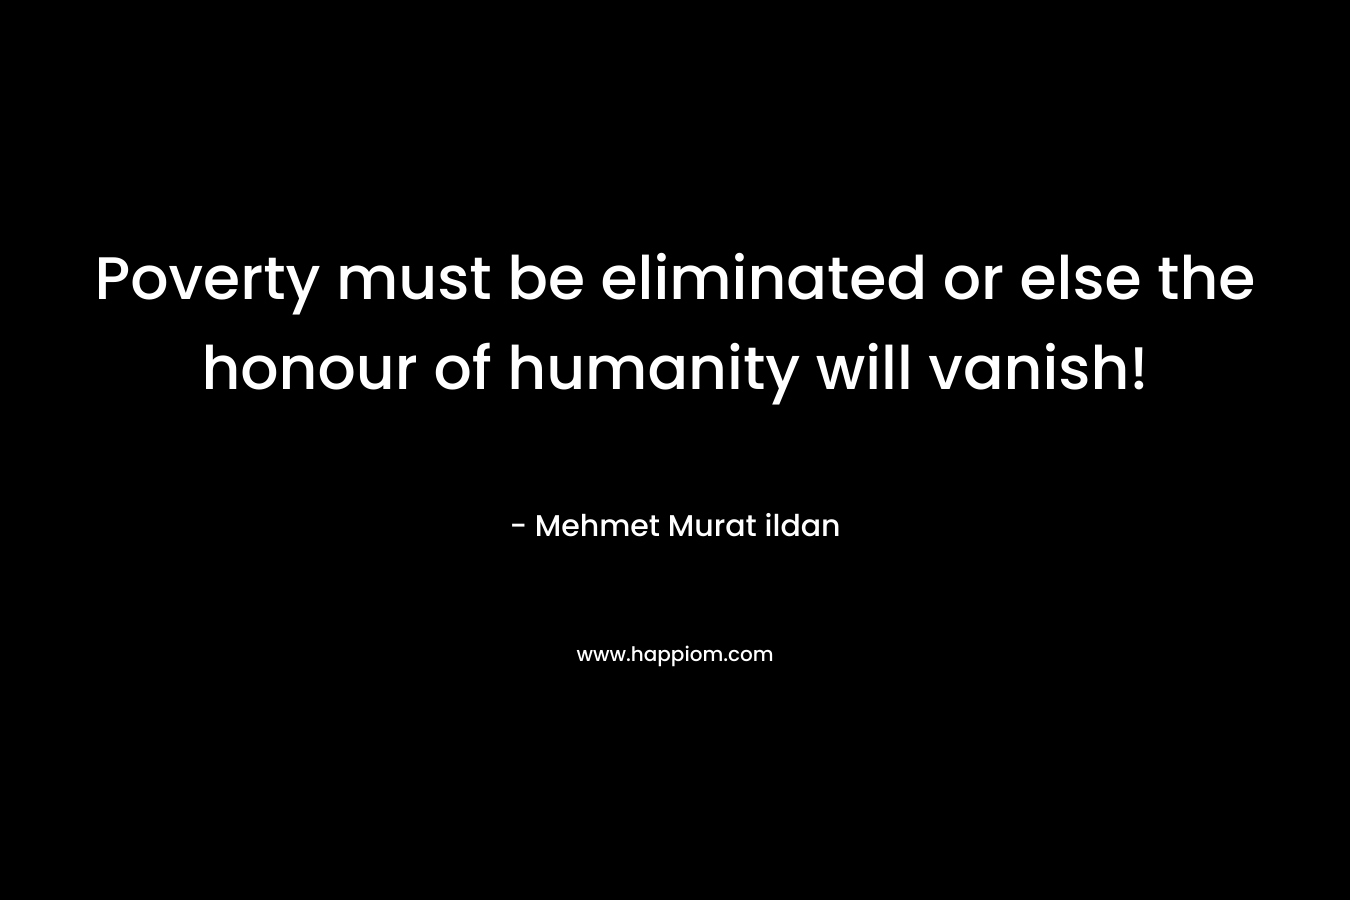 Poverty must be eliminated or else the honour of humanity will vanish!